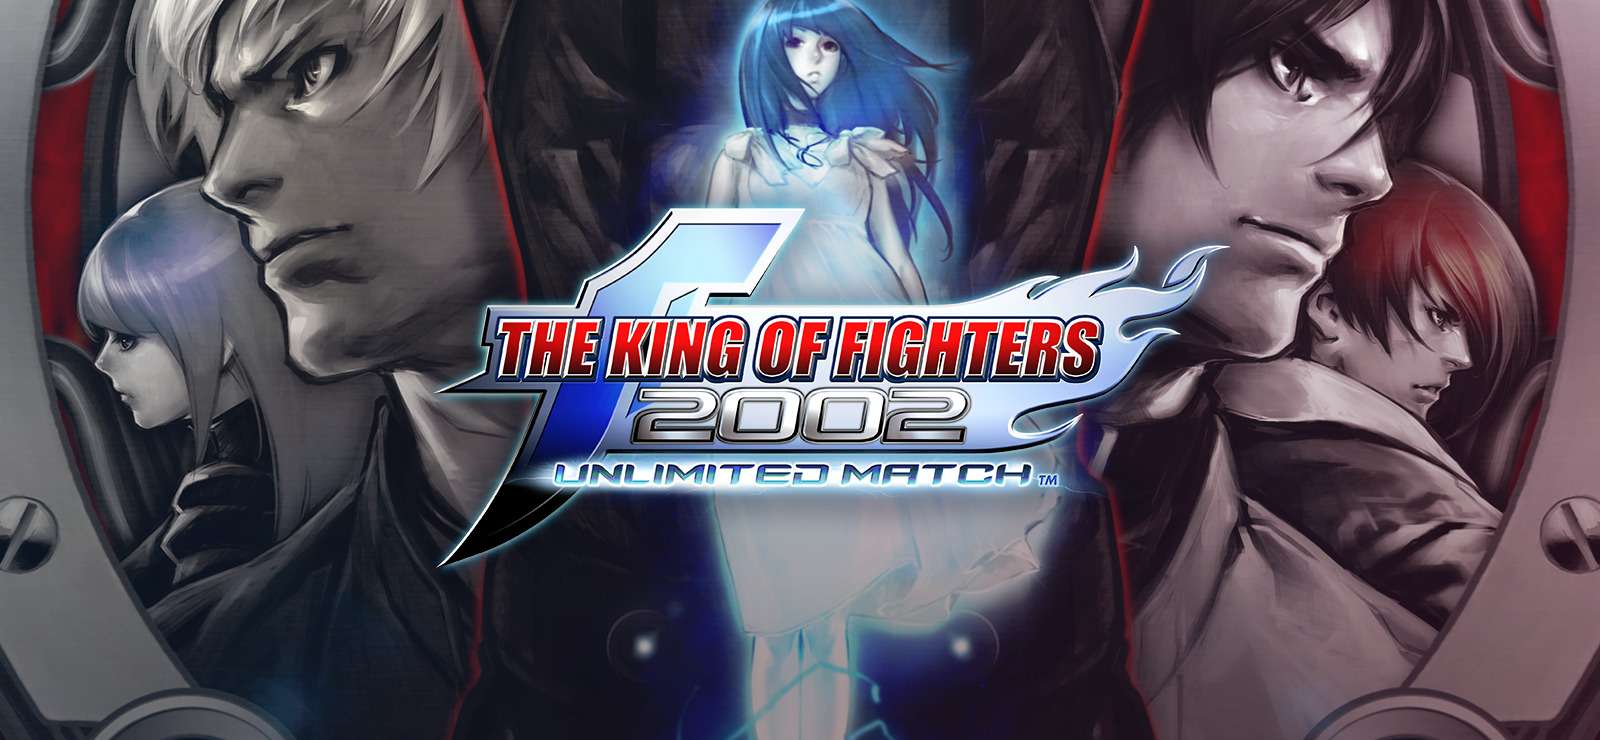 The King of Fighters 2002 llegará a PlayStation 4